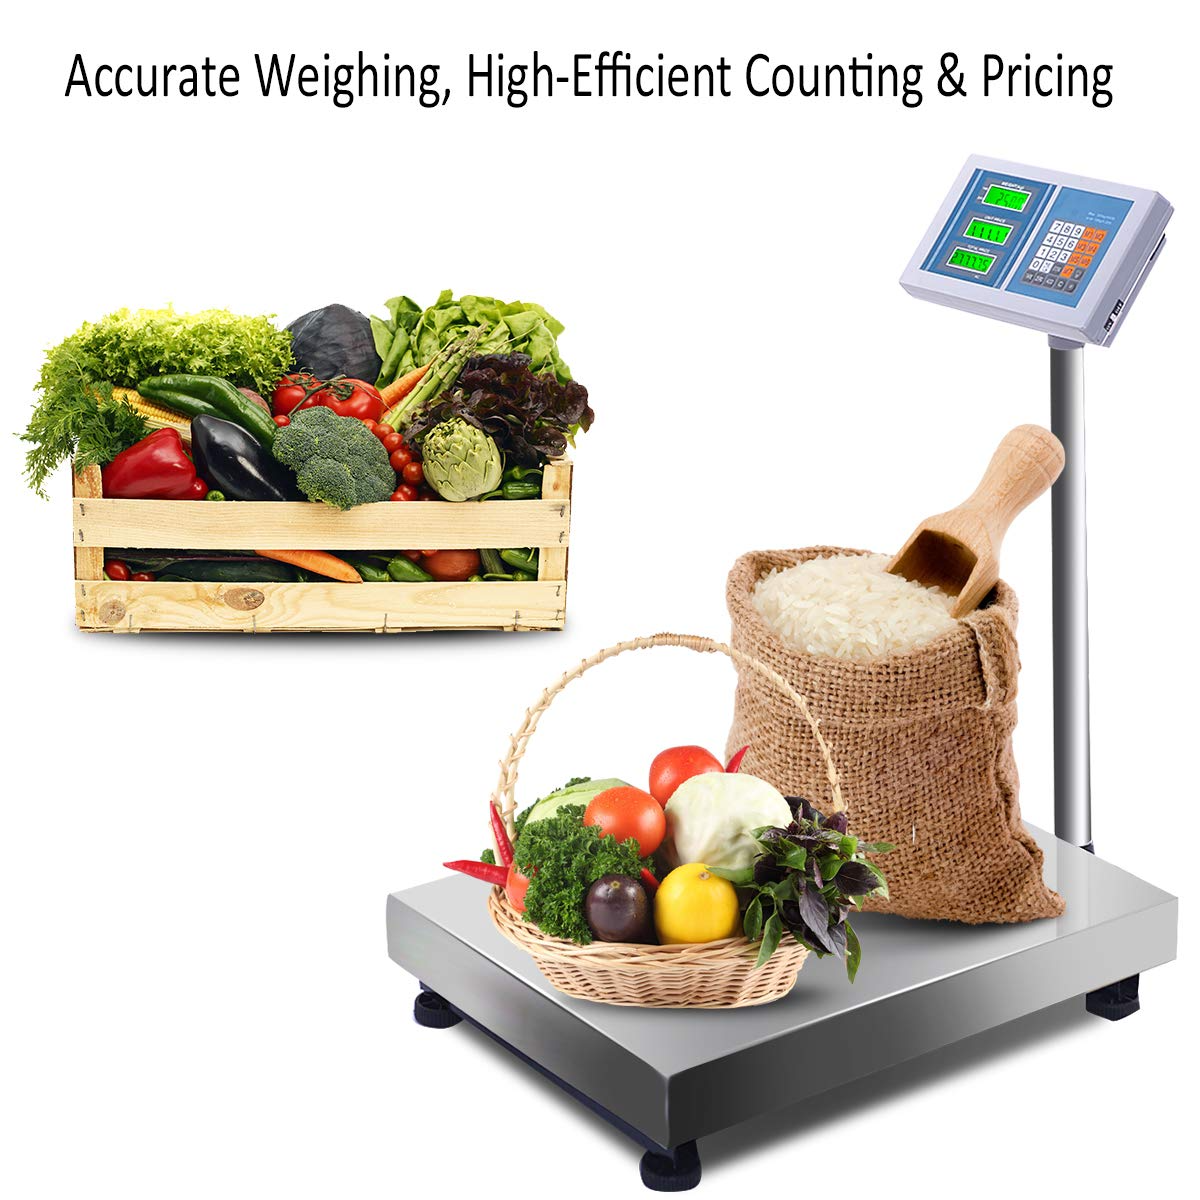 Giantex 660lbs Weight Computing Digital Scale Floor Platform Scale Postal Scale Accurate Shipping Mailing LB/KG Price Calculator, Silver